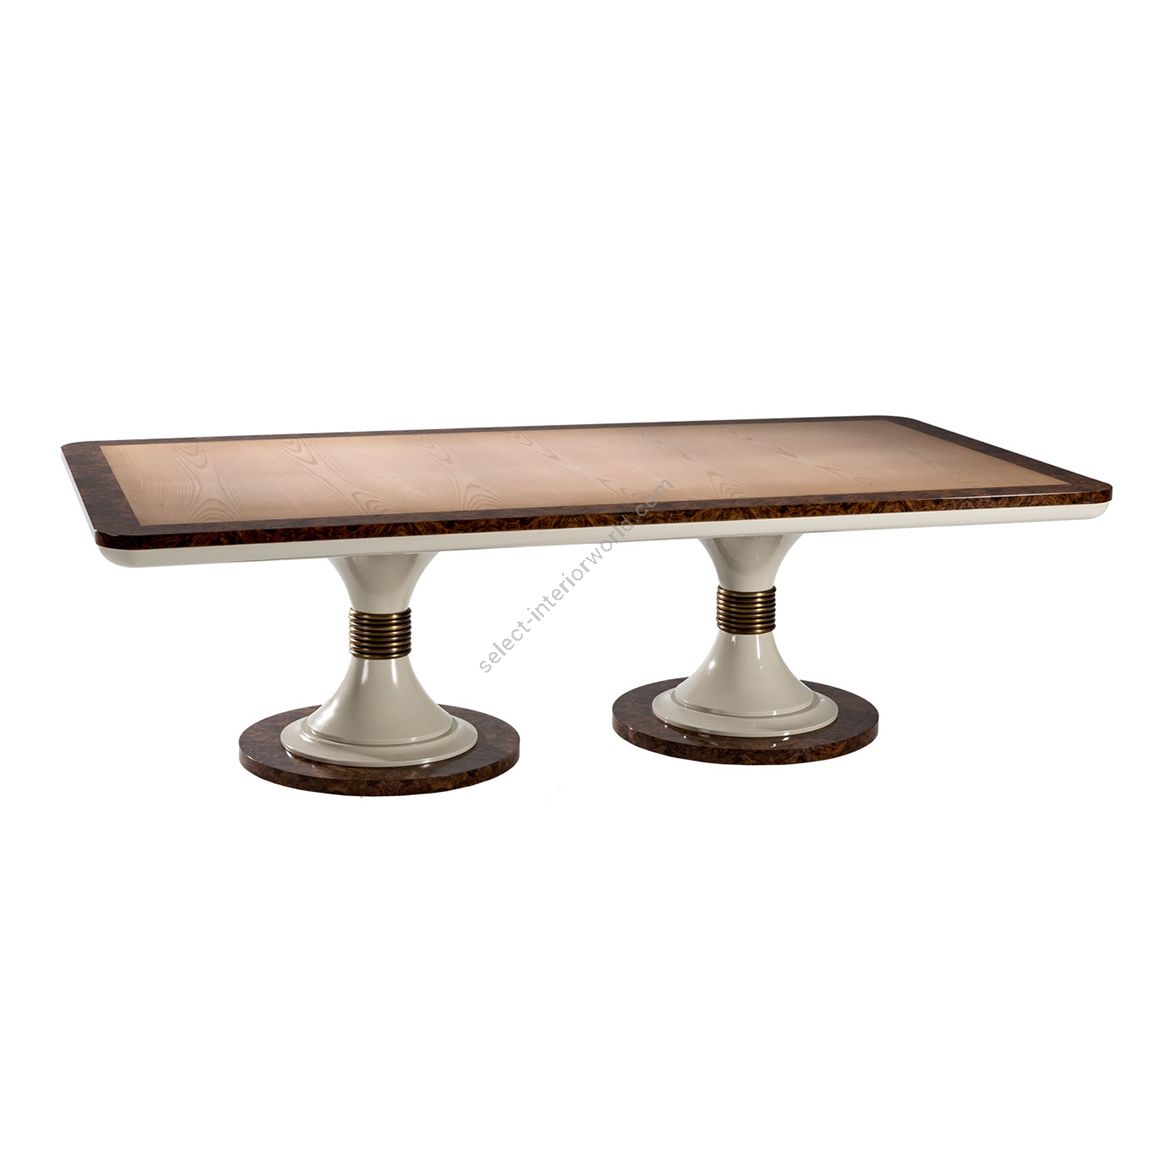 Mariner / Dining table / Ascot 50387.0